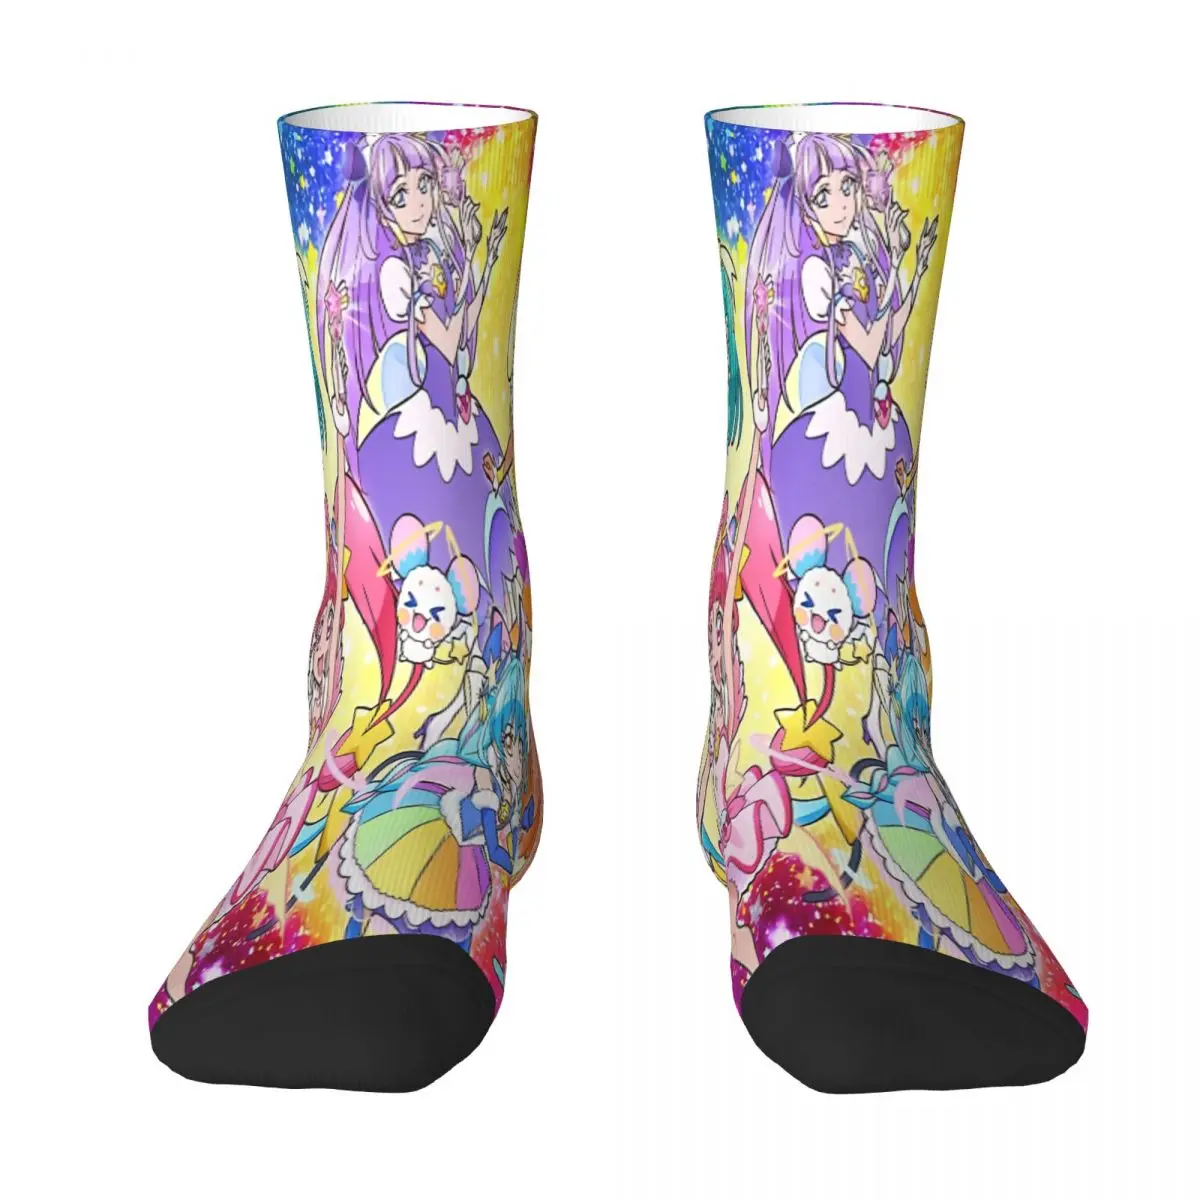 

Star Twinkle All Together Pretty Cure Precure Princess Anime Sock Socks Men Women Polyester Stockings Customizable Design